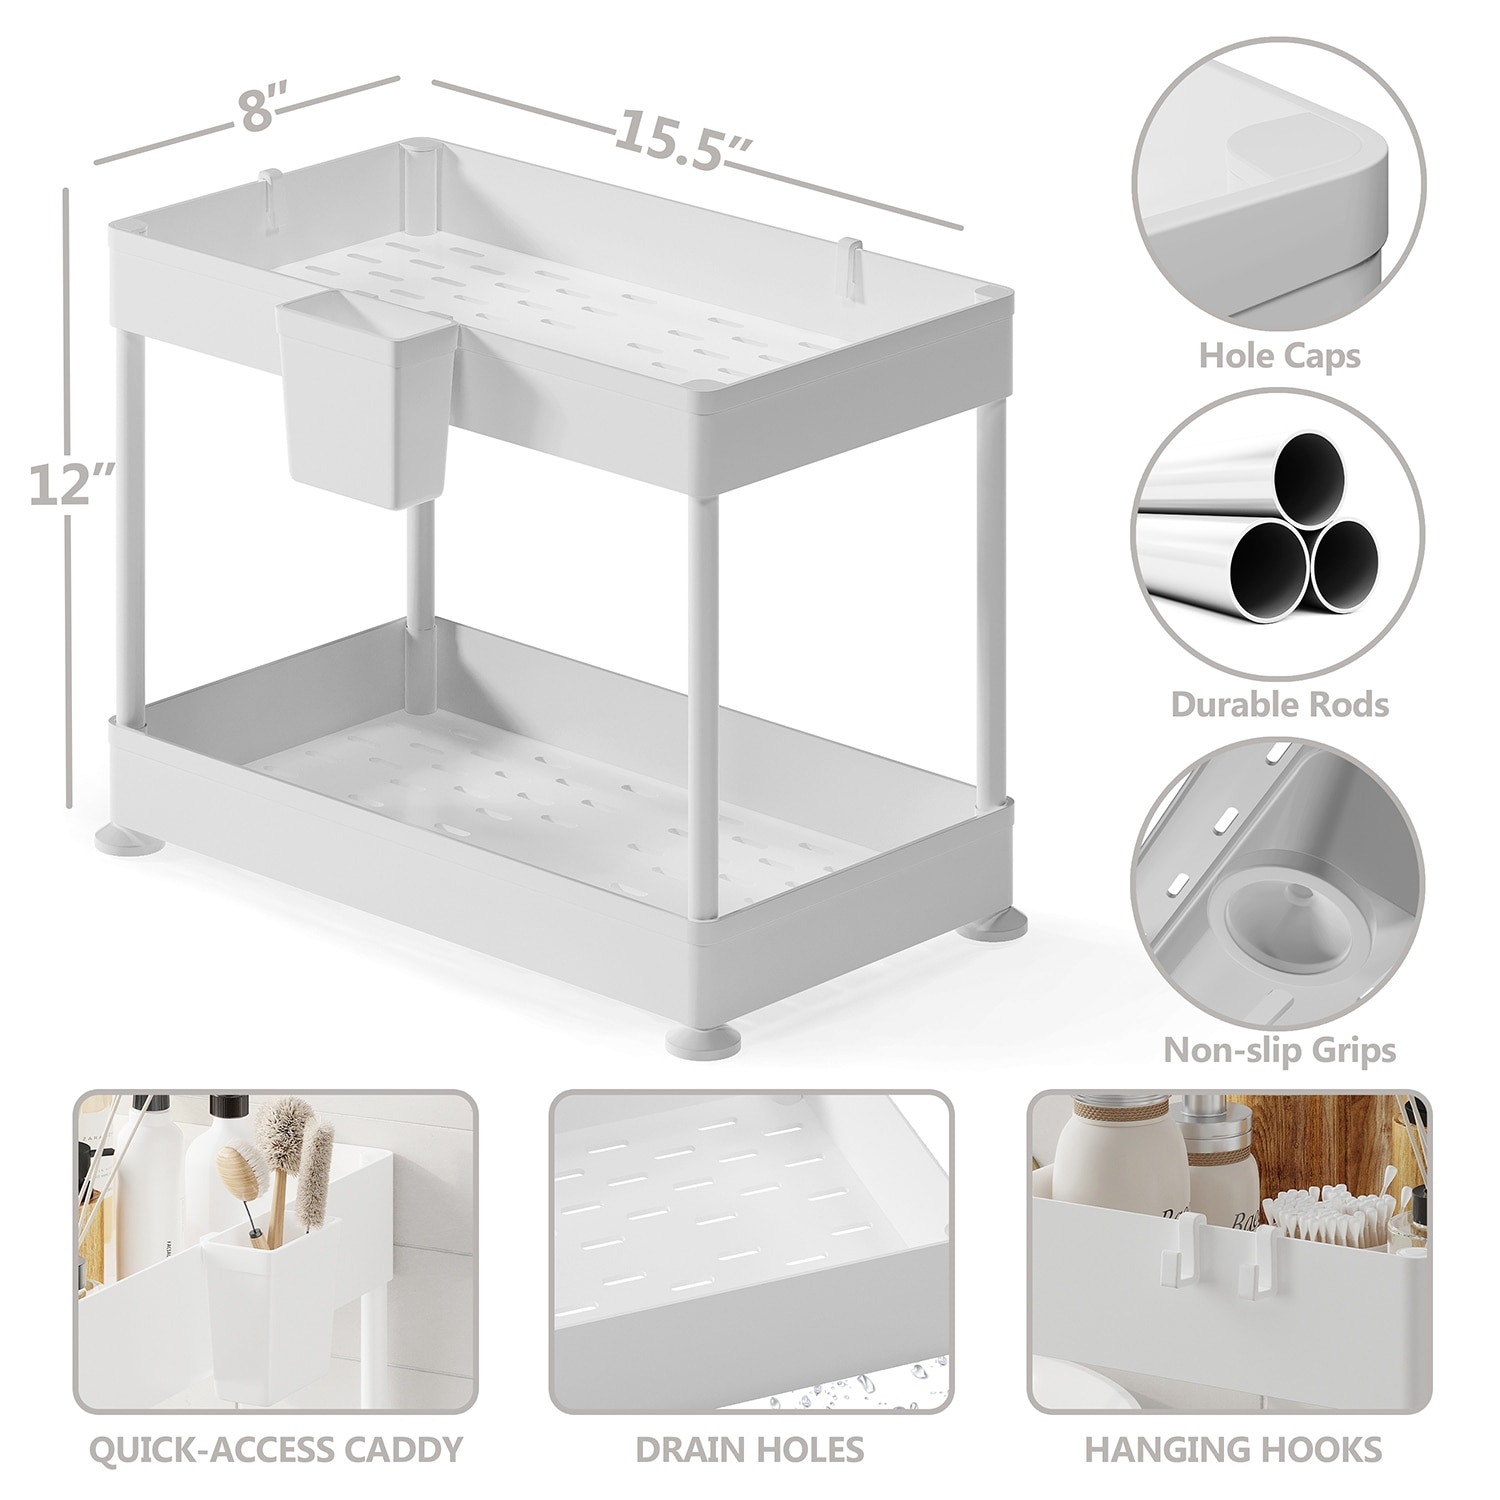 https://ak1.ostkcdn.com/images/products/is/images/direct/9992f0d4bf0d53bd761db8e76df32e371ab601d5/StorageBud-2-Tier-Non-Slip-Grip-Kitchen-Under-Sink-Organizer---Bathroom-Cabinet-Organizer-with-Utility-Hooks-and-Side-Caddy.jpg